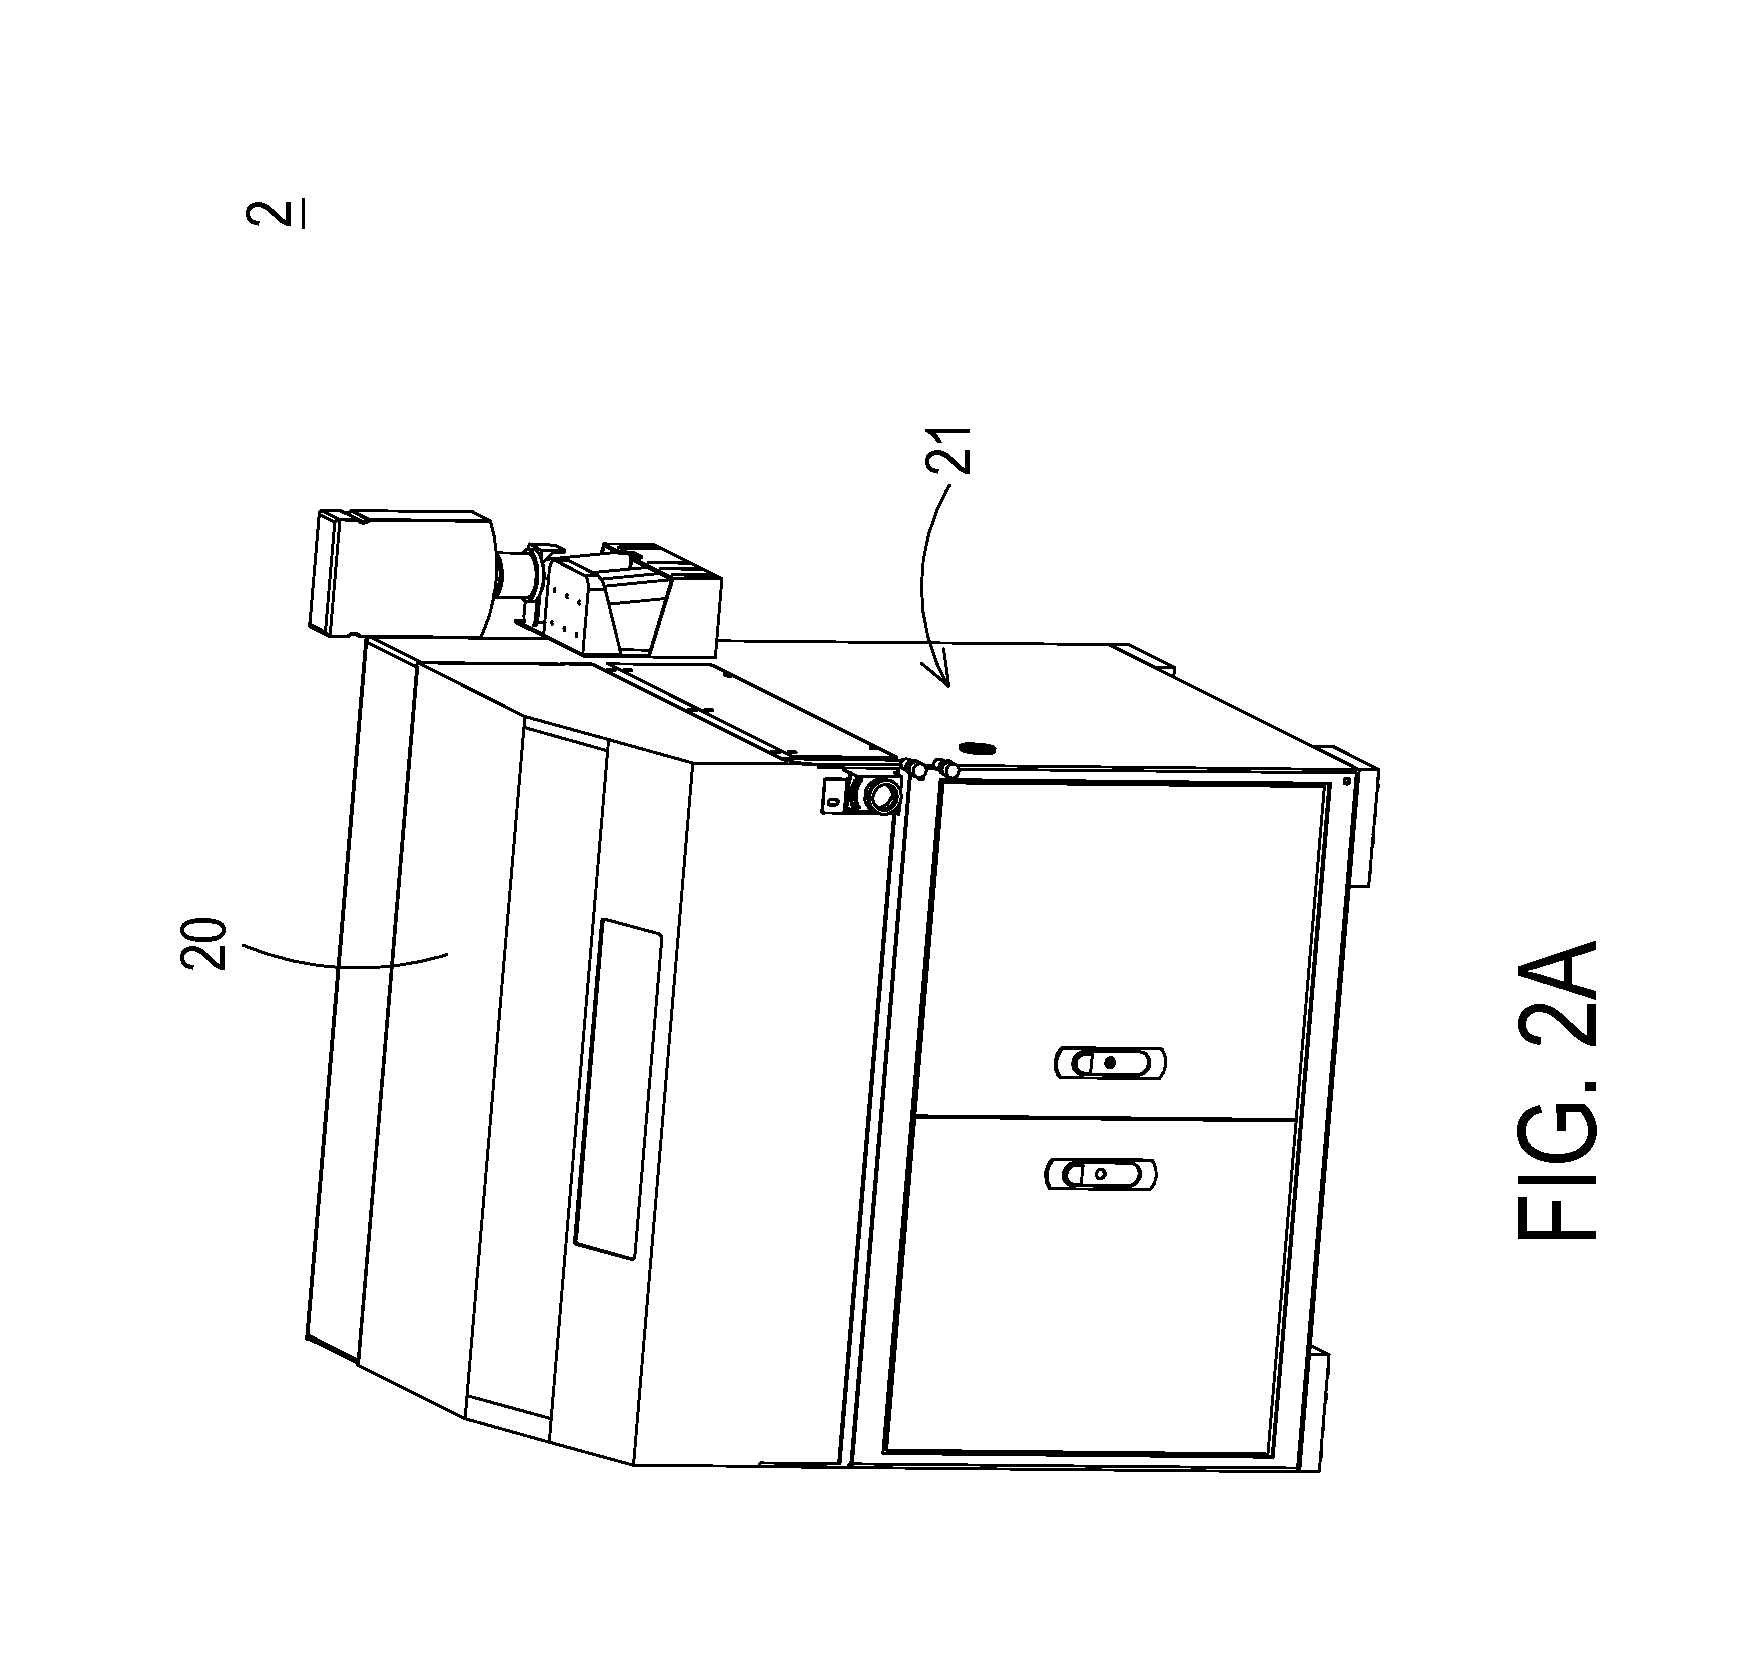 Rapid prototyping apparatus for producing three-dimensional ceramic object